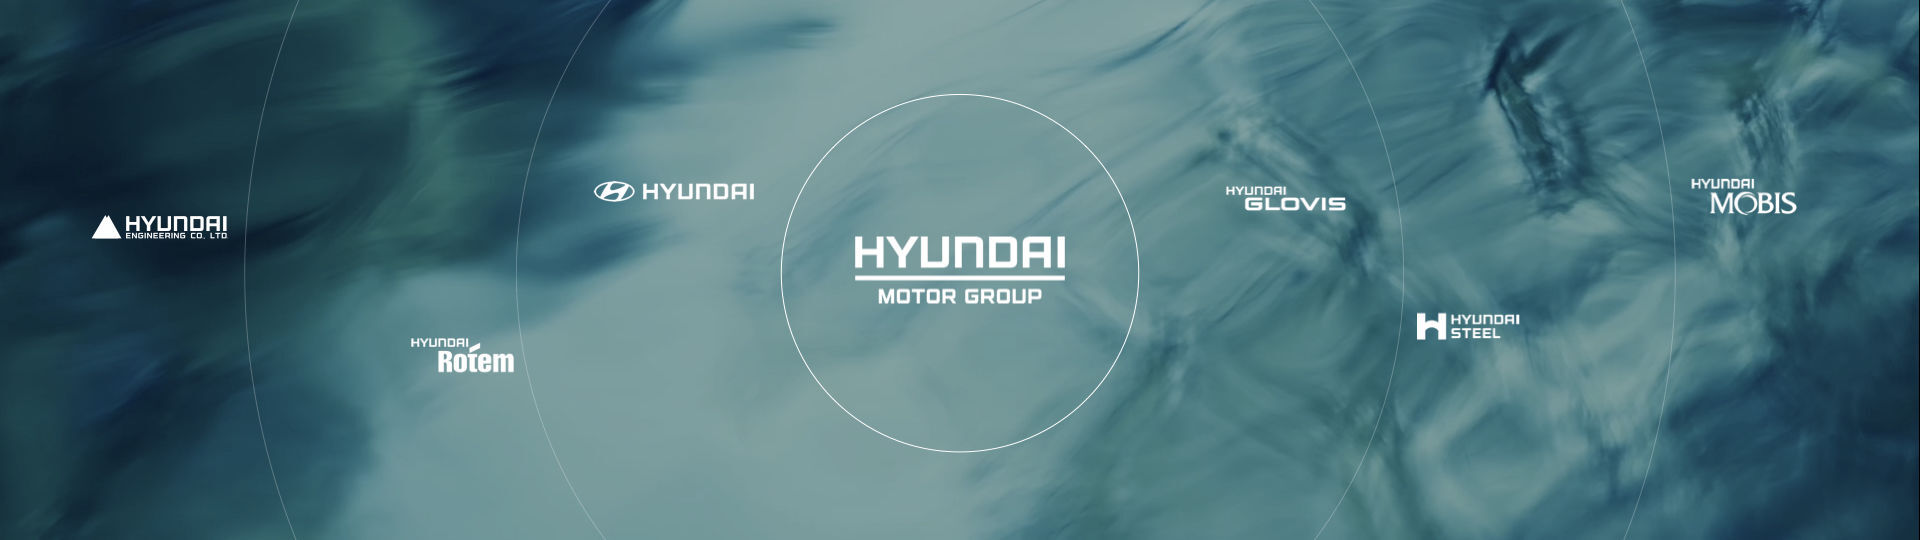 Close-up image of water drops on a watery-blue background with the Hyundai Motor Group logo in the center and various Hyundai entities’ logos positioned in orbit.